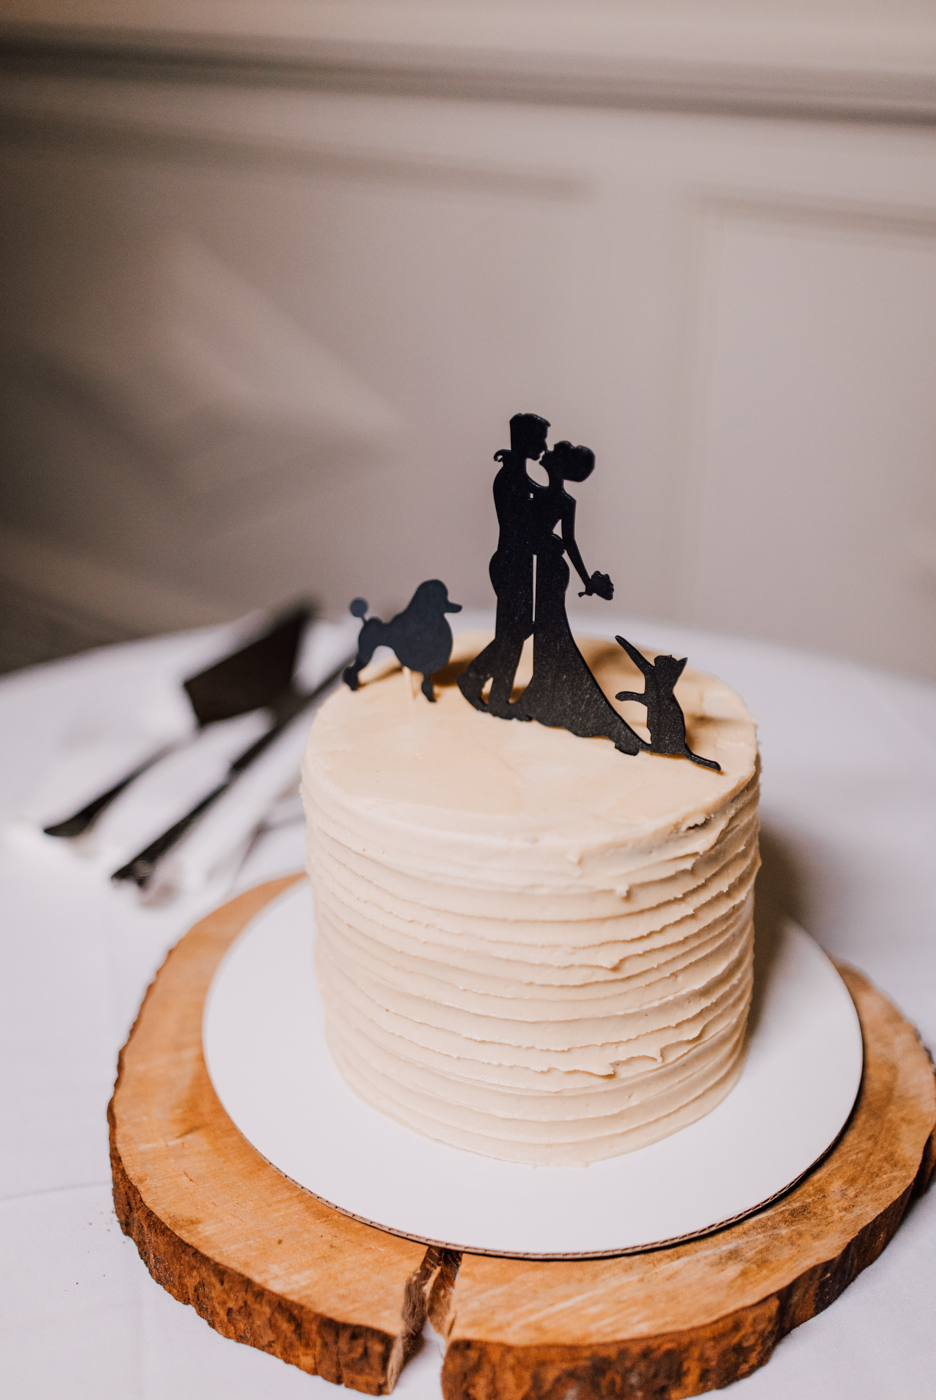  Small 1-tier wedding cake with silhouette cake topper, sitting atop a slice of wood 